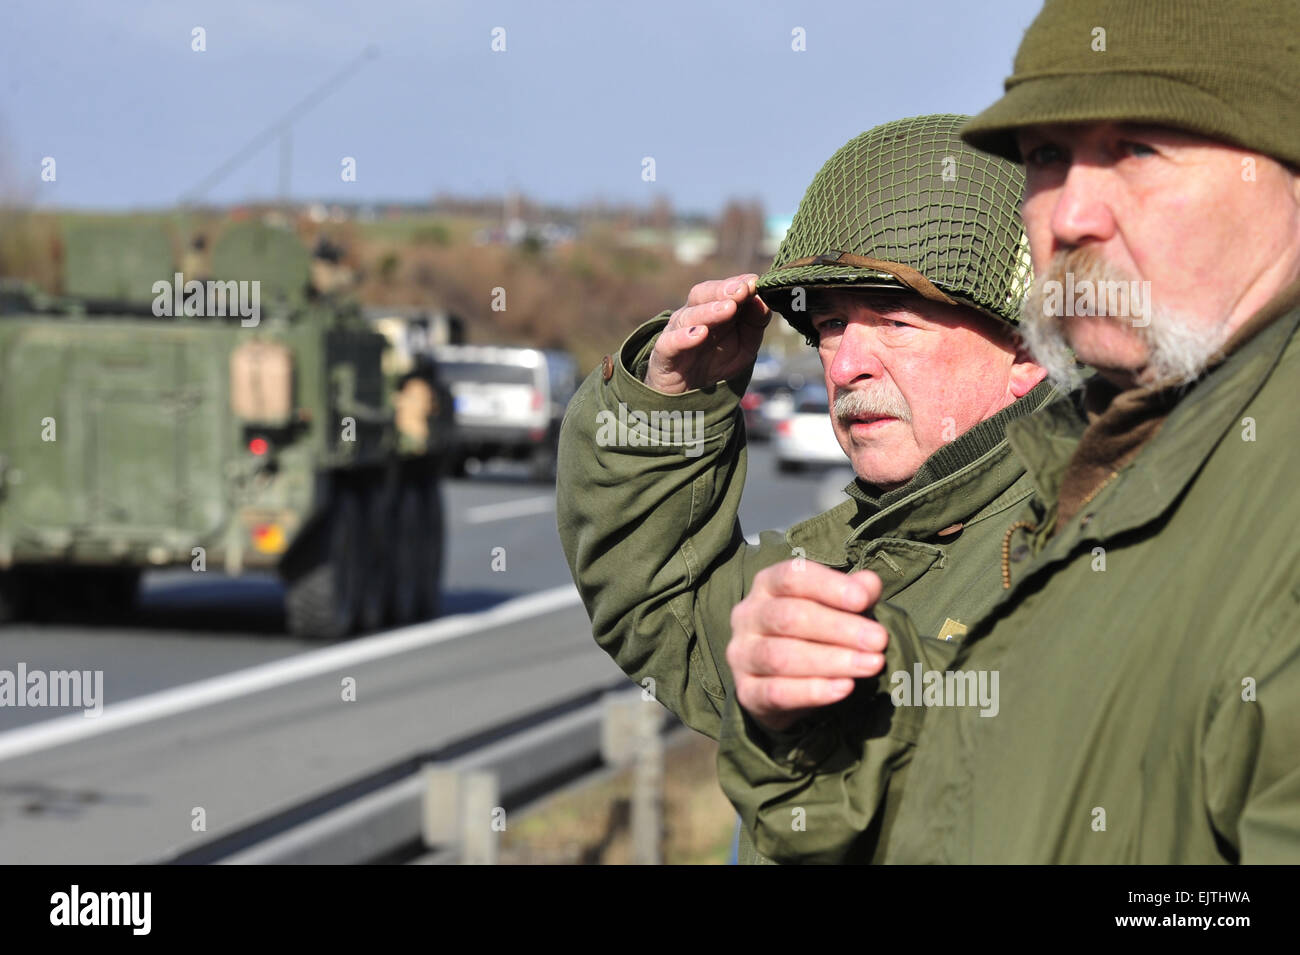 Prague, Czech Republic, 01st Apr, 2015. Hundreds of supporters including members of historical army club wait along the roads to greet the U.S. military convoy, near Pilsen, Czech Republic, April 1, 2015. The Convoy left the barracks in Prague-Ruzyne and heads for the Rozvadov-Waidhaus, west Bohemia, border with Germany. The troops continue to the Vilseck military base in Bavaria. Some 500 soldiers on around 115 armoured vehicles are crossing the Czech Republic during the 'Dragoon Ride' to demonstrate support for the allies' territories that feel threatened by the Russian aggression in Ukraine Stock Photo